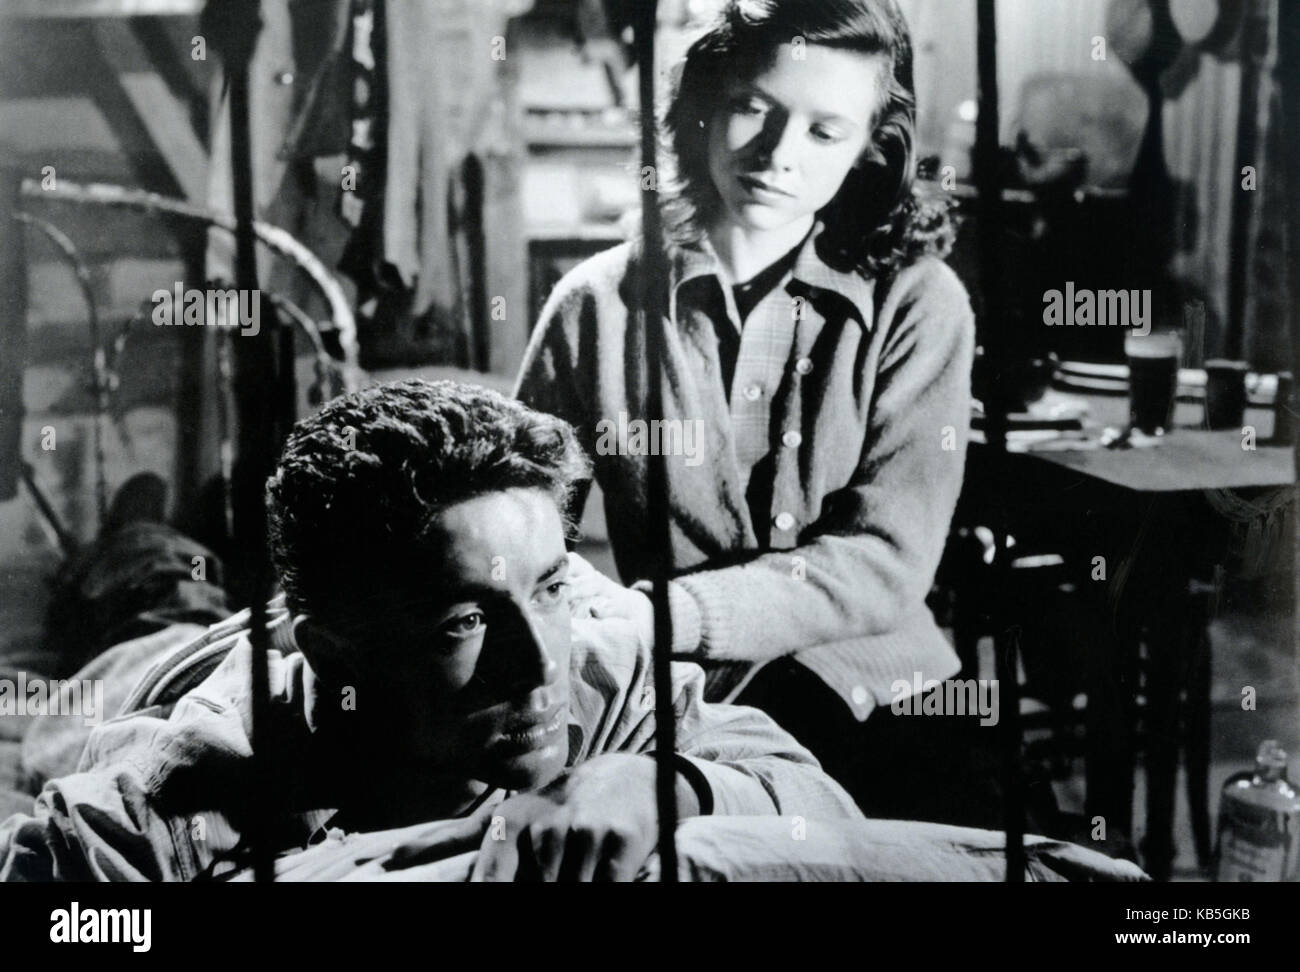 THEY LIVE BY NIGHT 1948 RKO Radio Pictures film with Cathy O'Donnell and Farley Granger Stock Photo